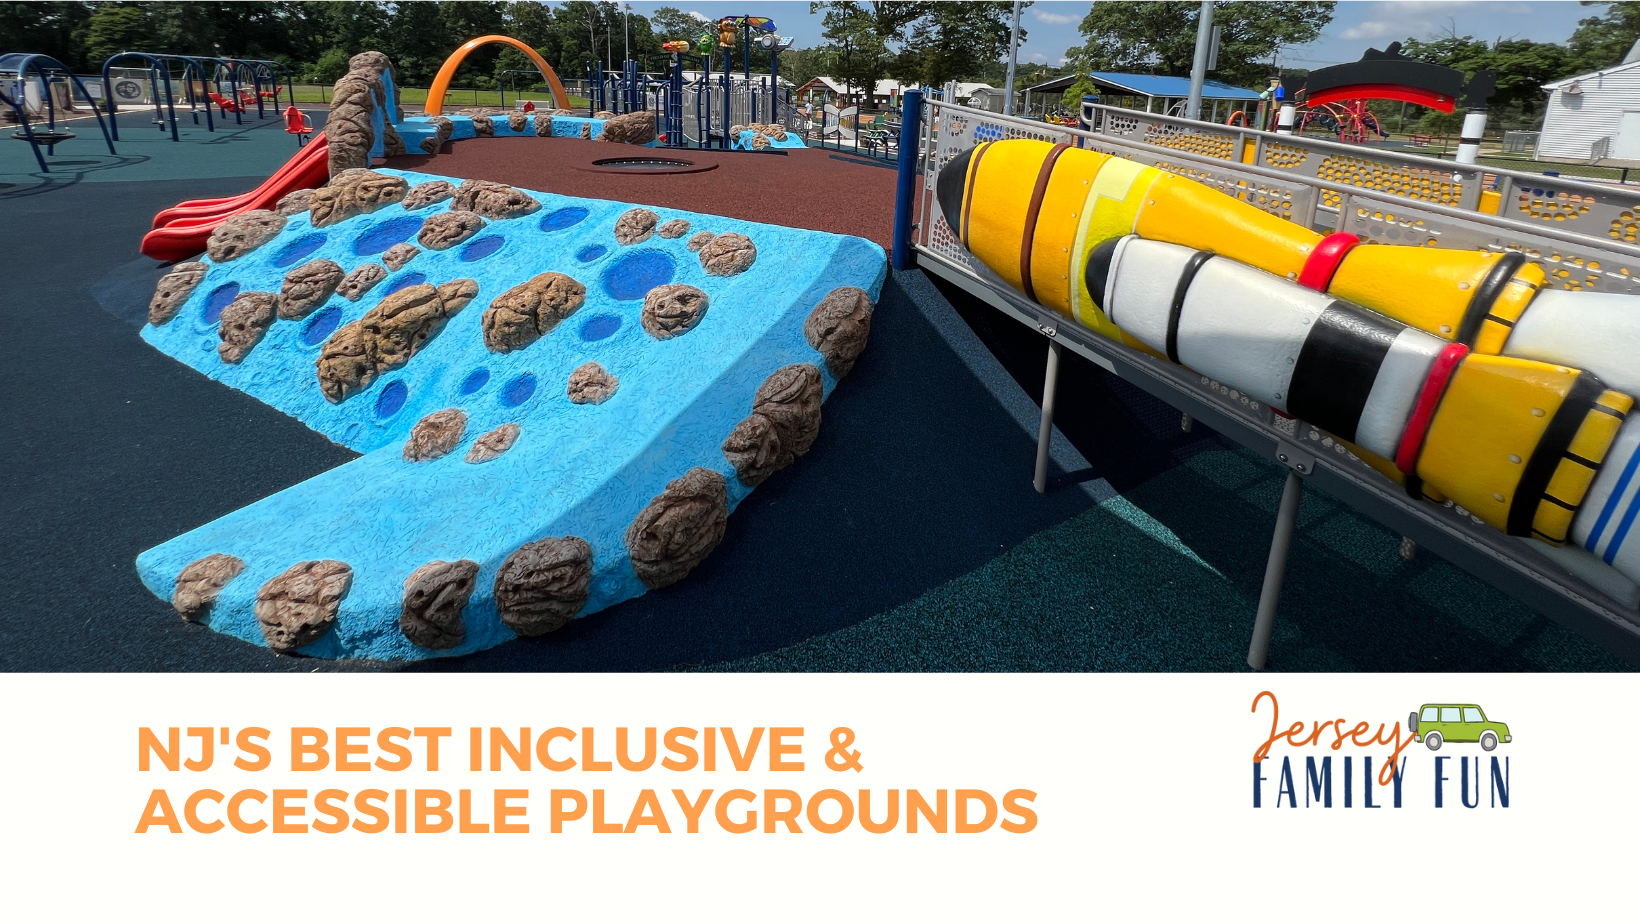 NJ Accessible playgrounds